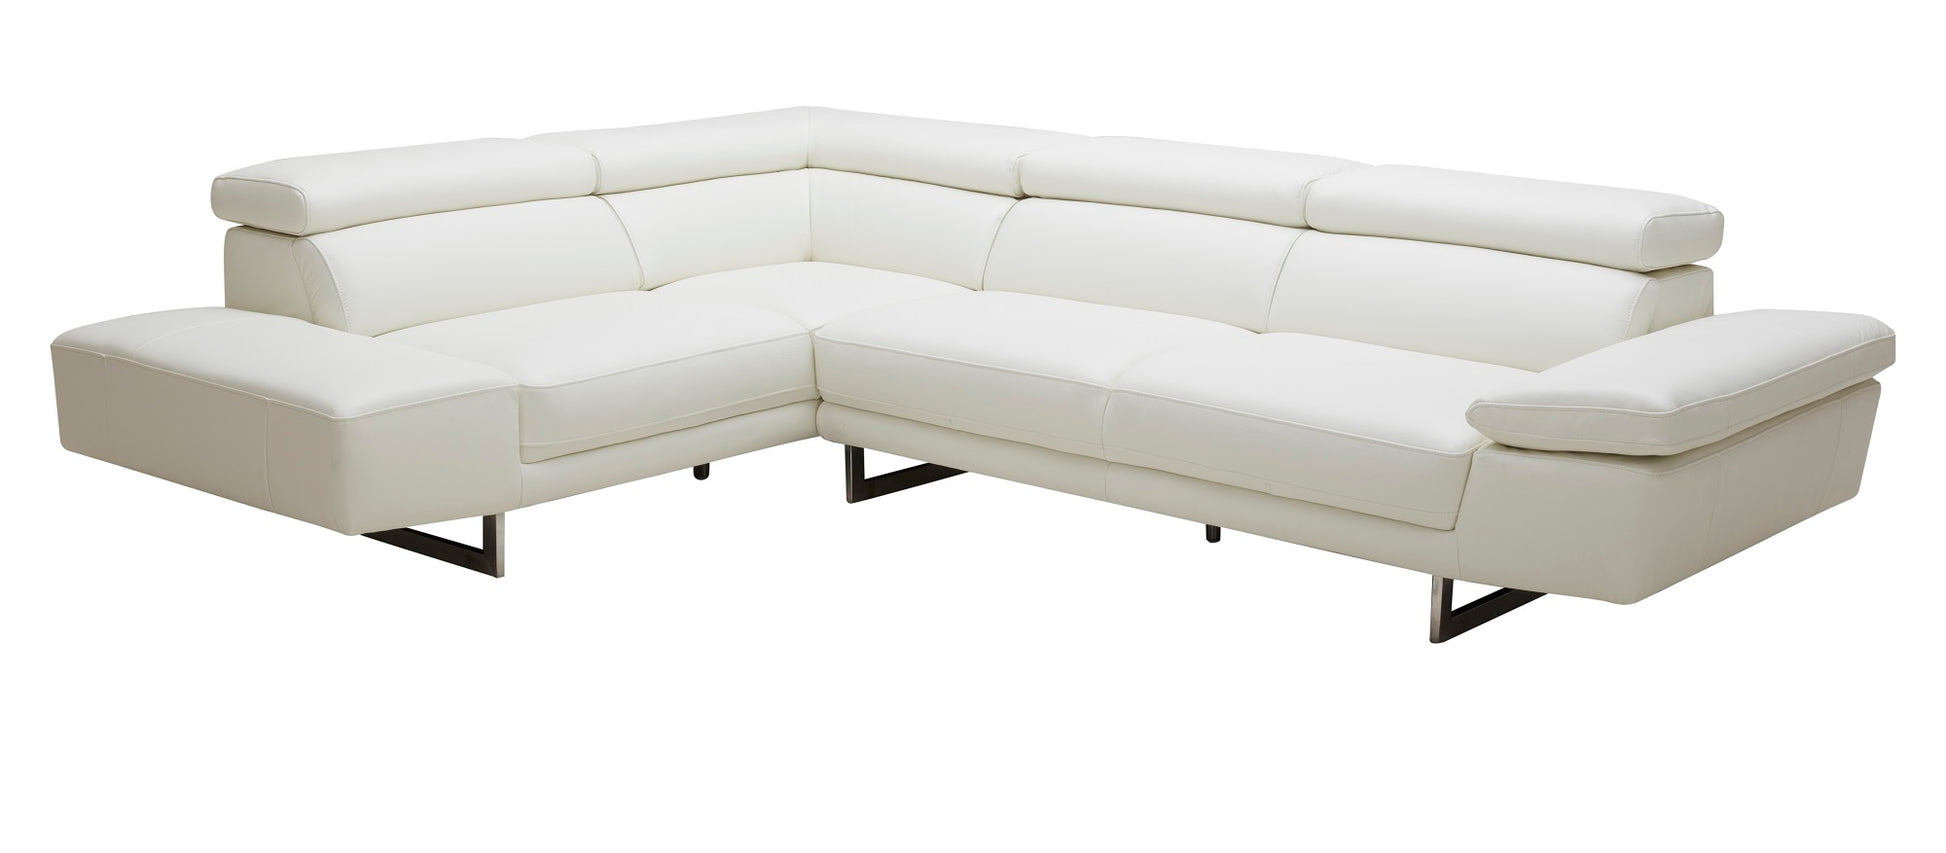 1717 Italian Leather Sectional Sofa LHF by JM